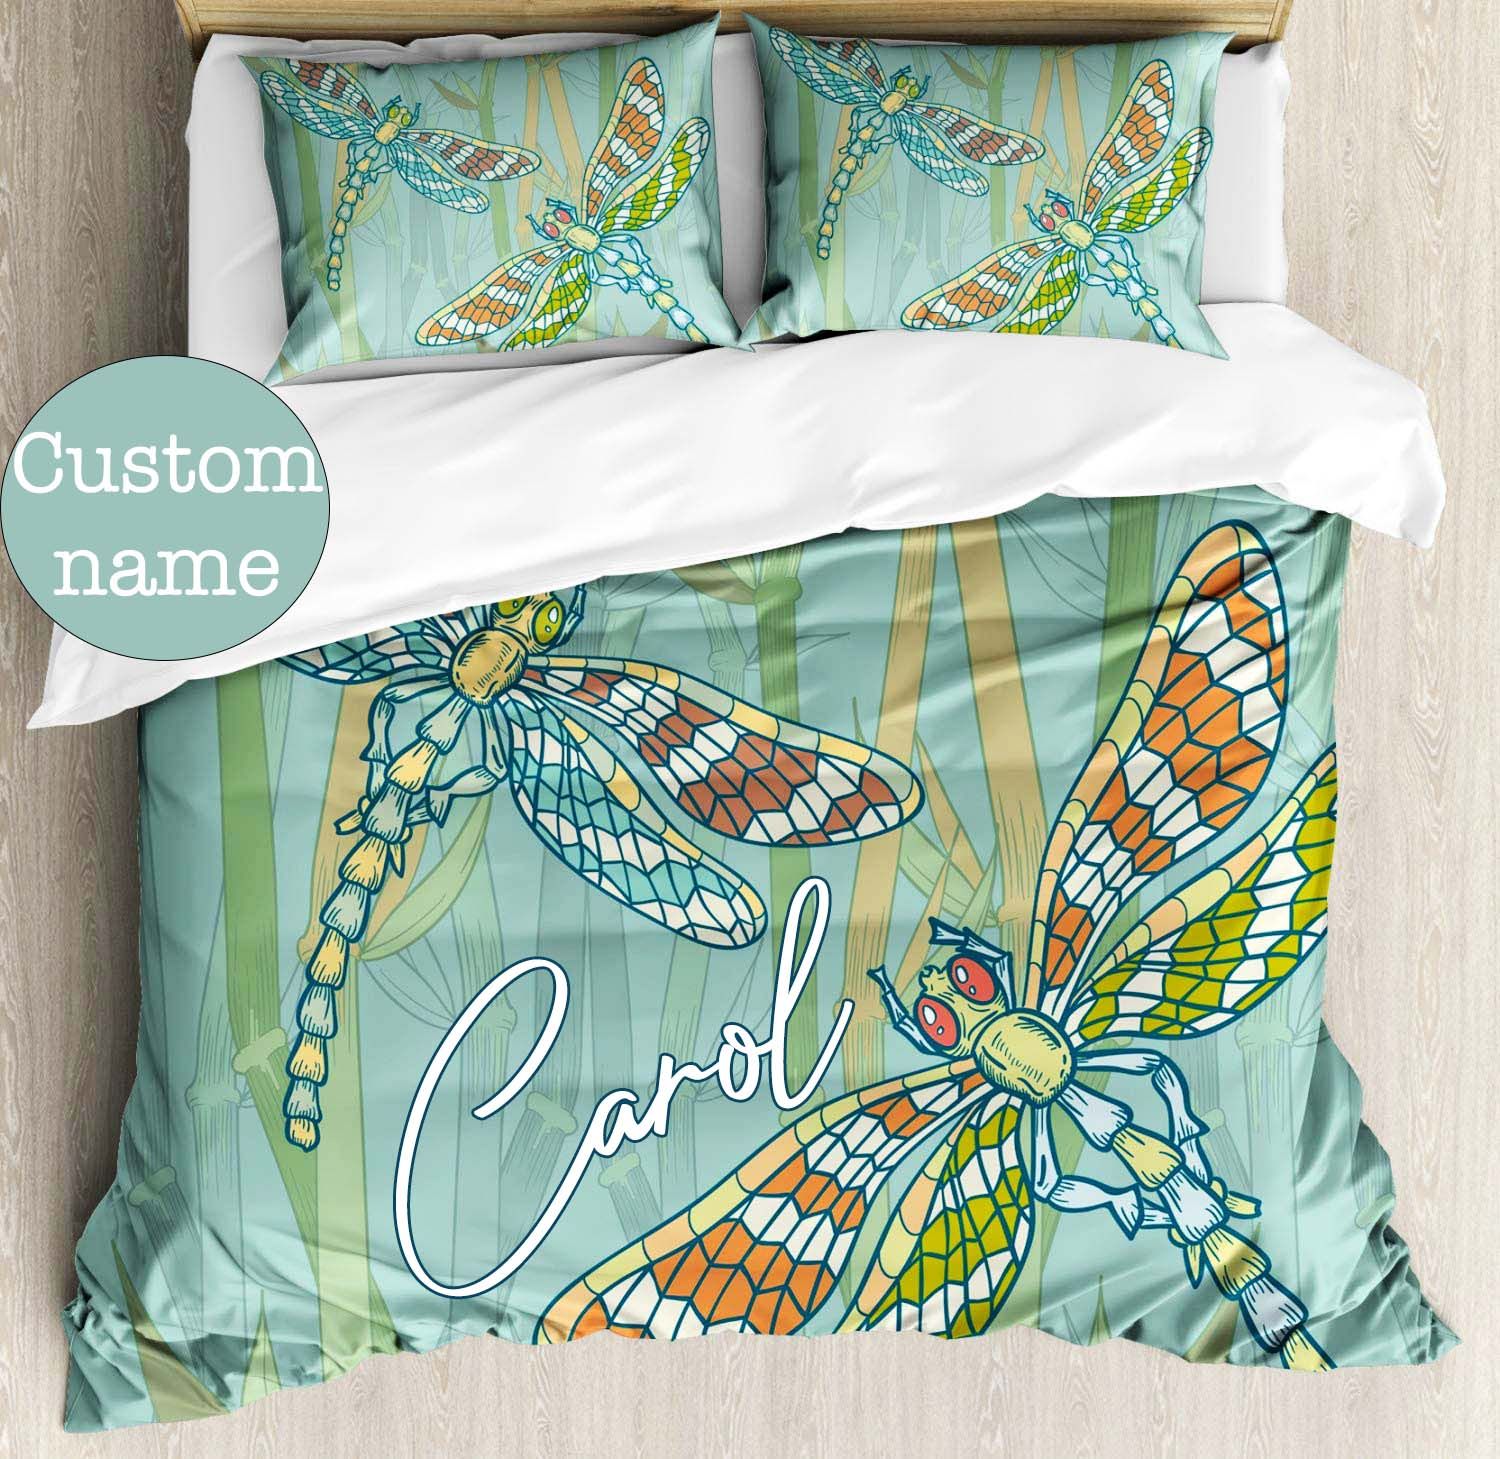 Personalized Dragonfly Couple Custom Name Duvet Cover Bedding Set